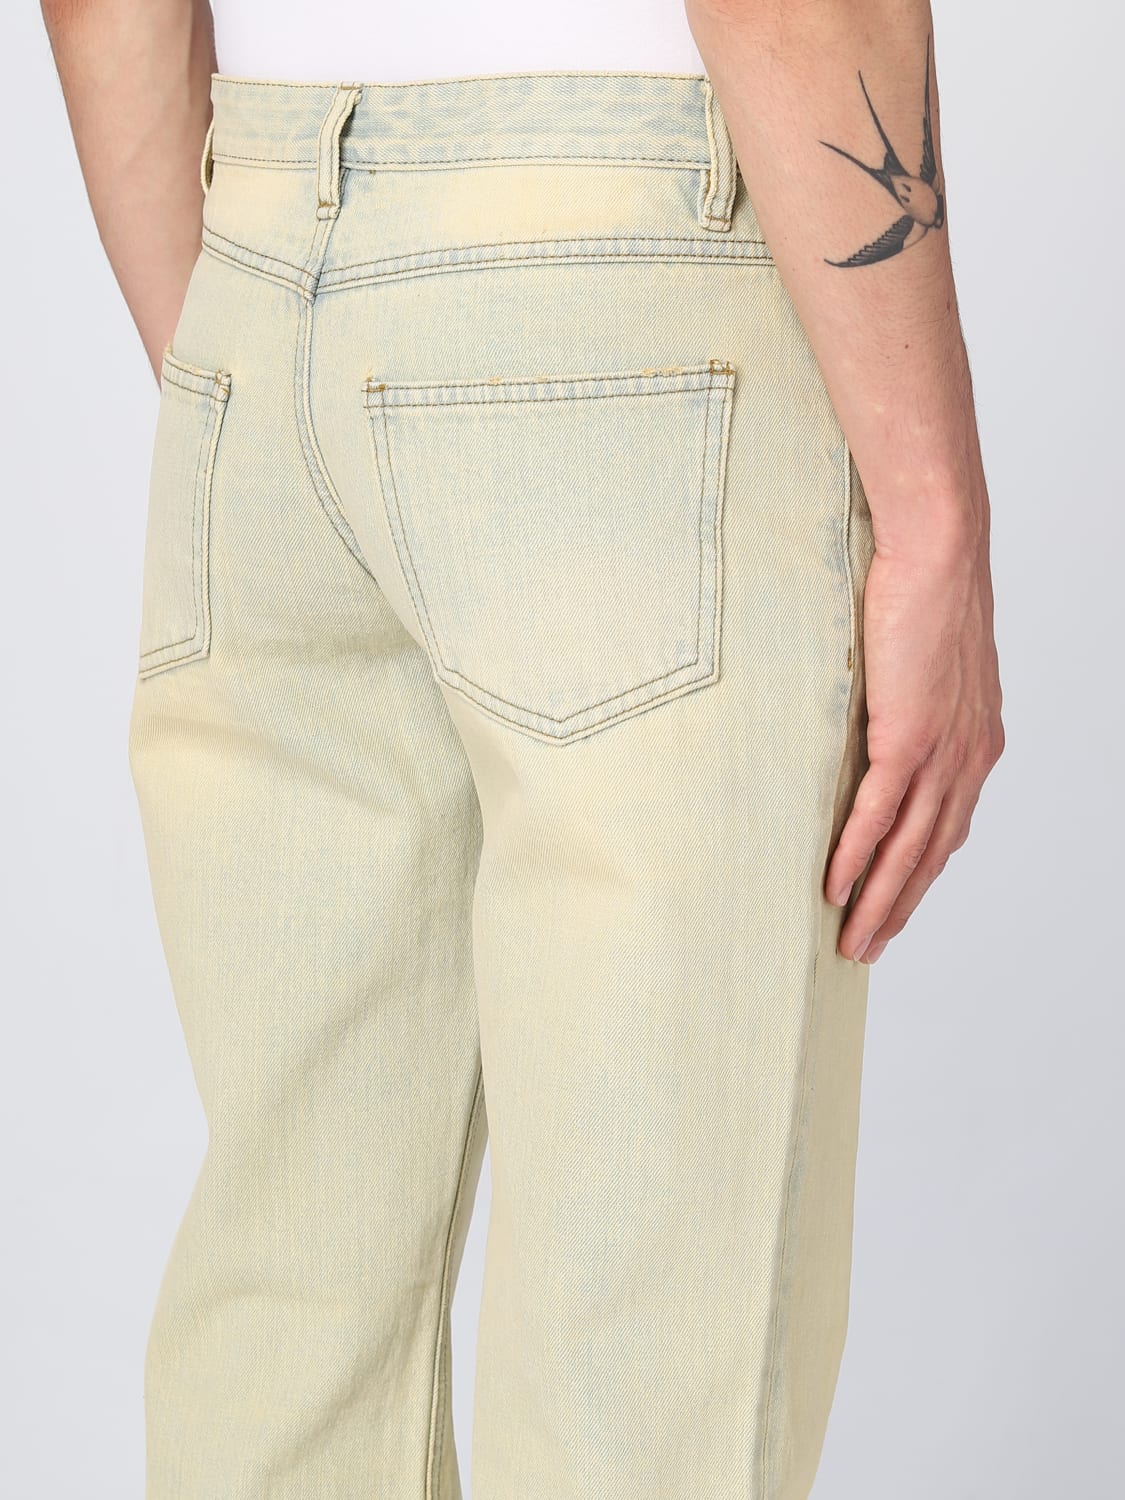 WE11DONE: pants for man - Beige | We11Done pants WDDP123385M online on ...